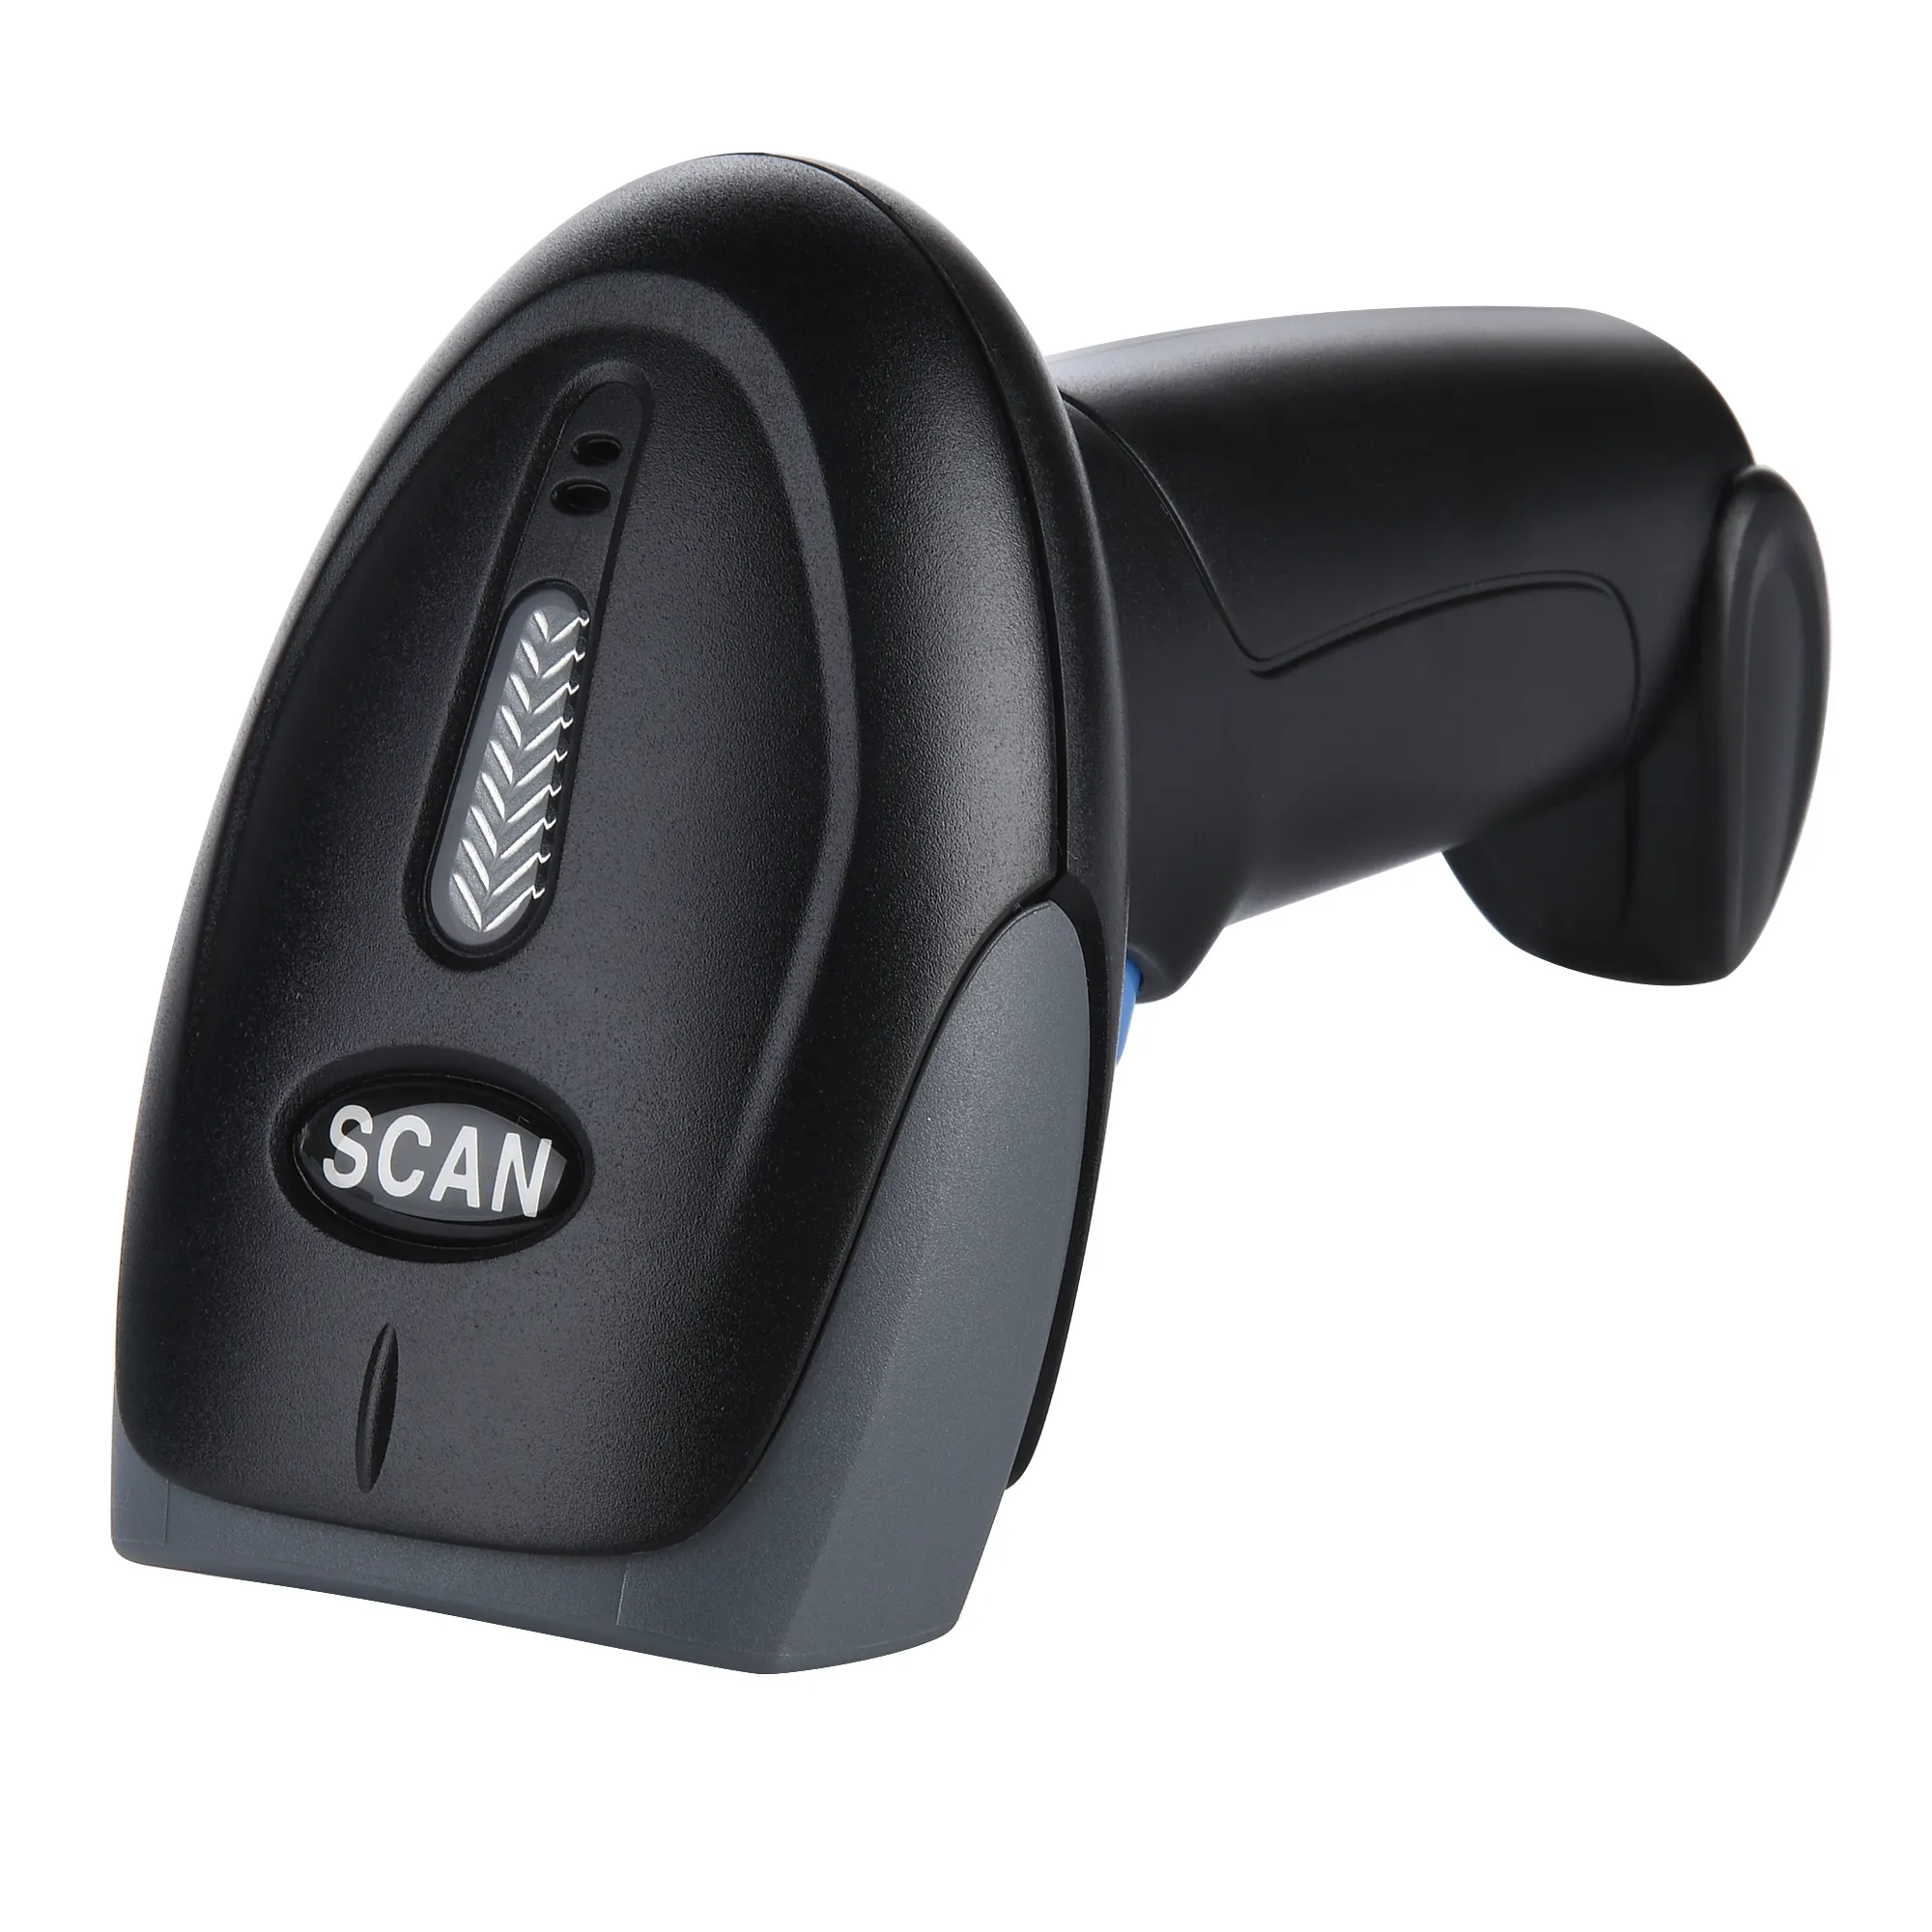 High quality 1D+2D QR Code Android 2.4G wireless CCD Handheld High Scan Pro Barcode Scanner